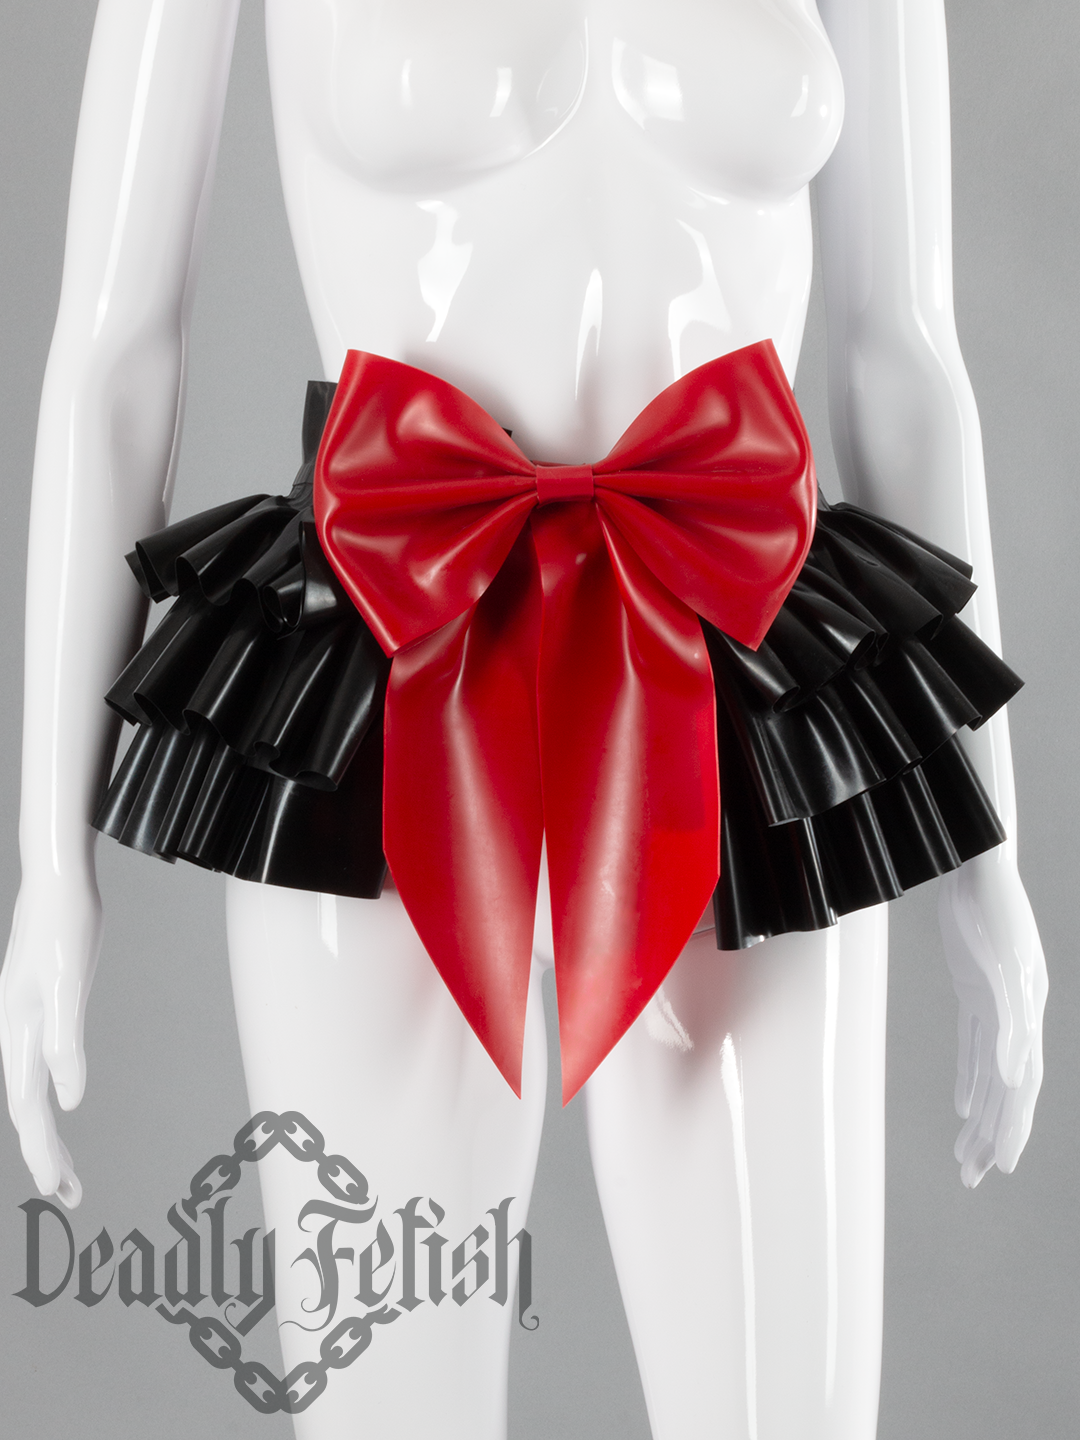 Deadly Fetish Made-to-Order Latex: Bow with Loop